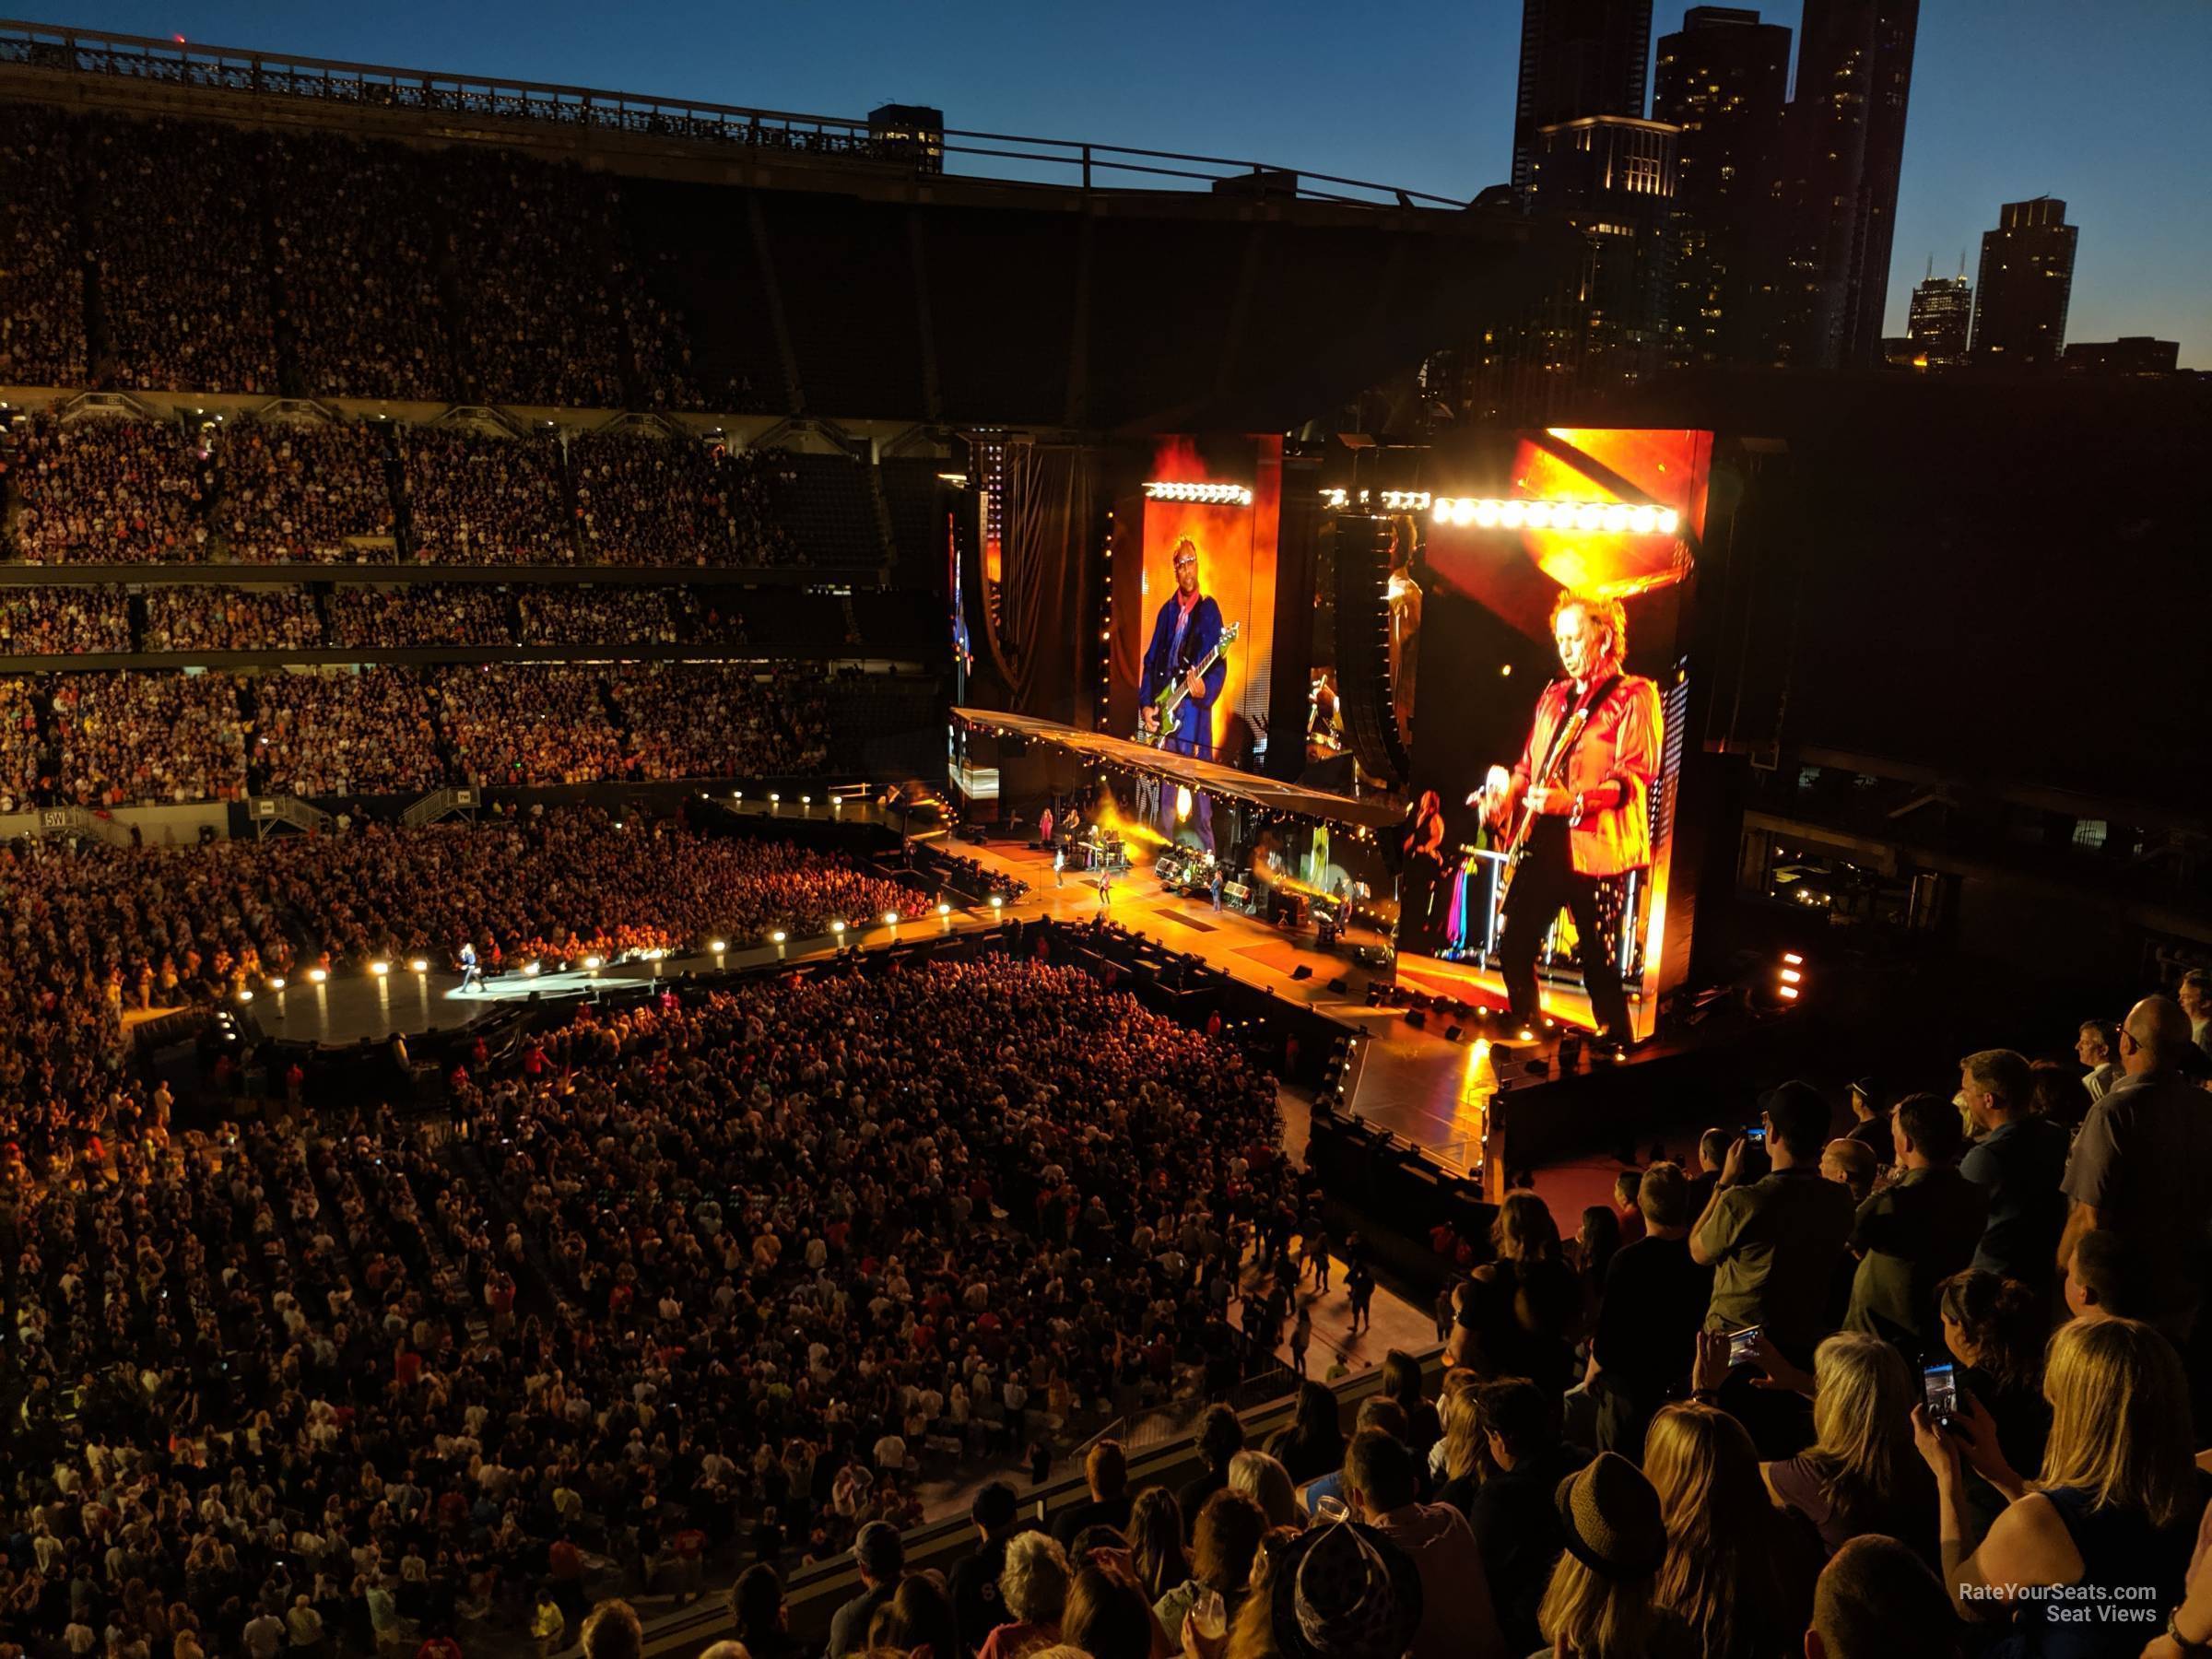 section 308, row 12 seat view  for concert - soldier field